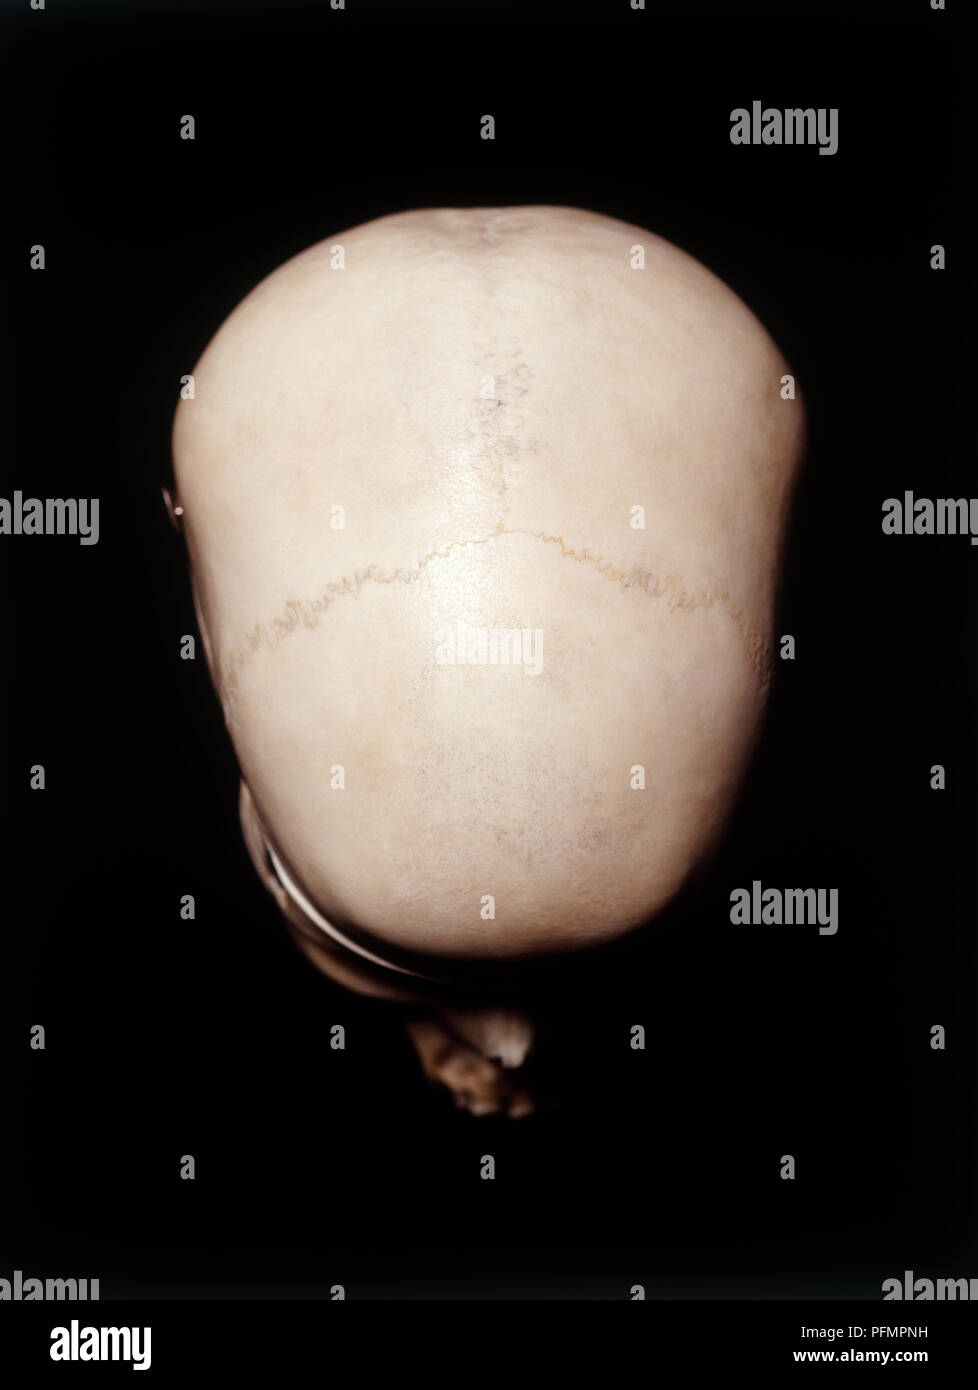 Female human skull, showing coronal suture and frontal bone, high angle view Stock Photo